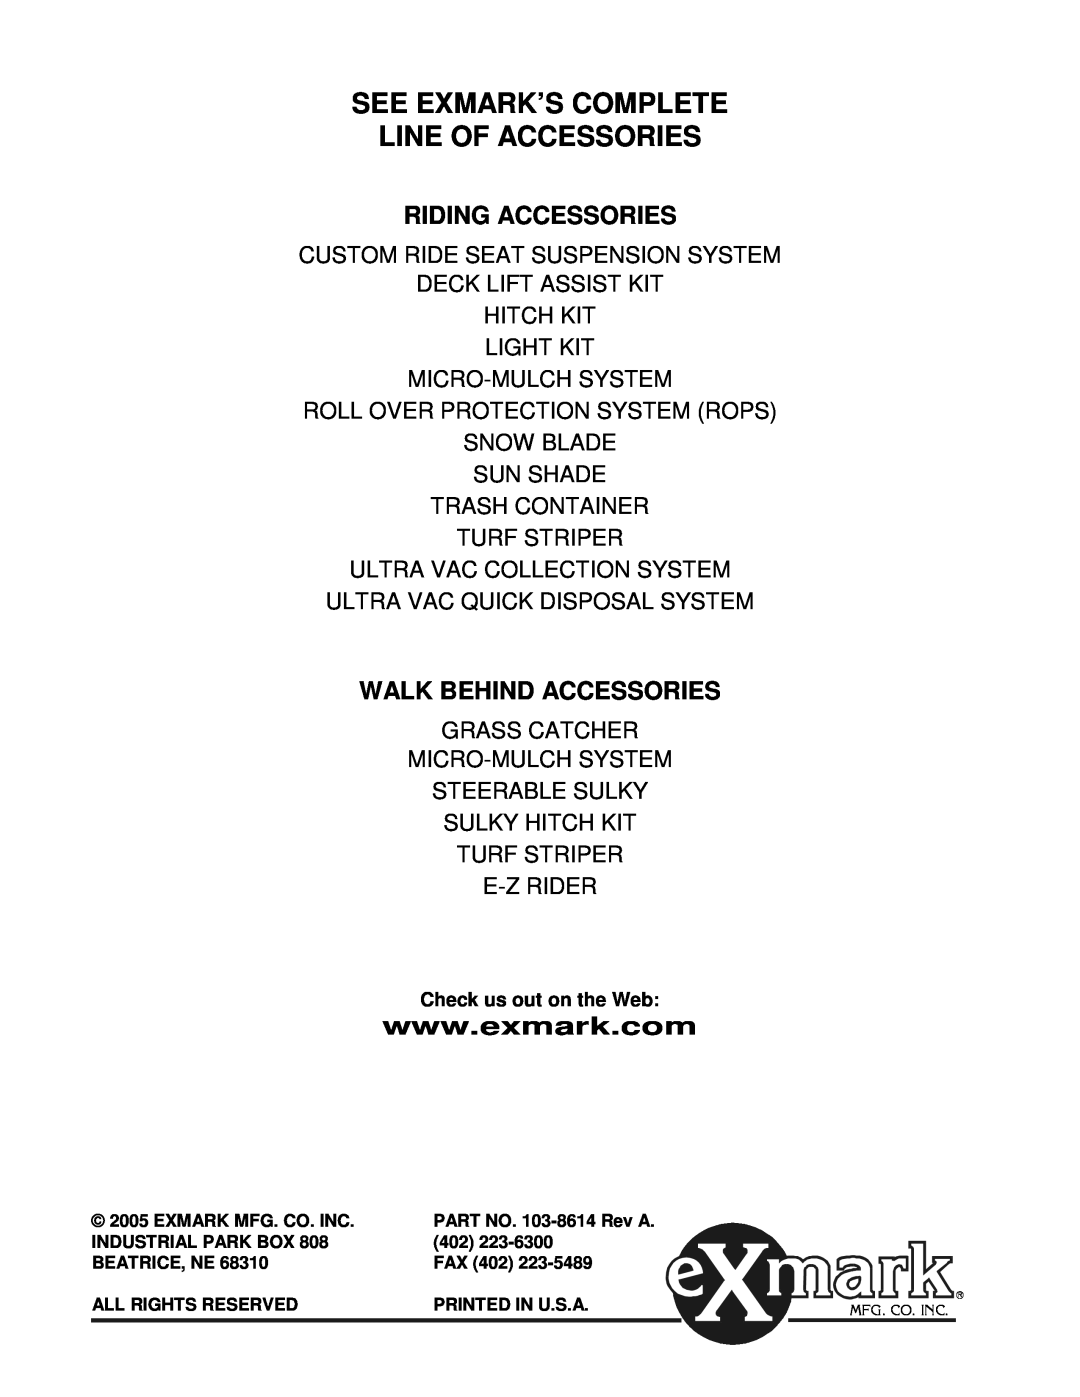 Exmark Cd42cd, Cd48cd, CD42CD manual Riding Accessories, Walk Behind Accessories, See Exmark’S Complete Line Of Accessories 